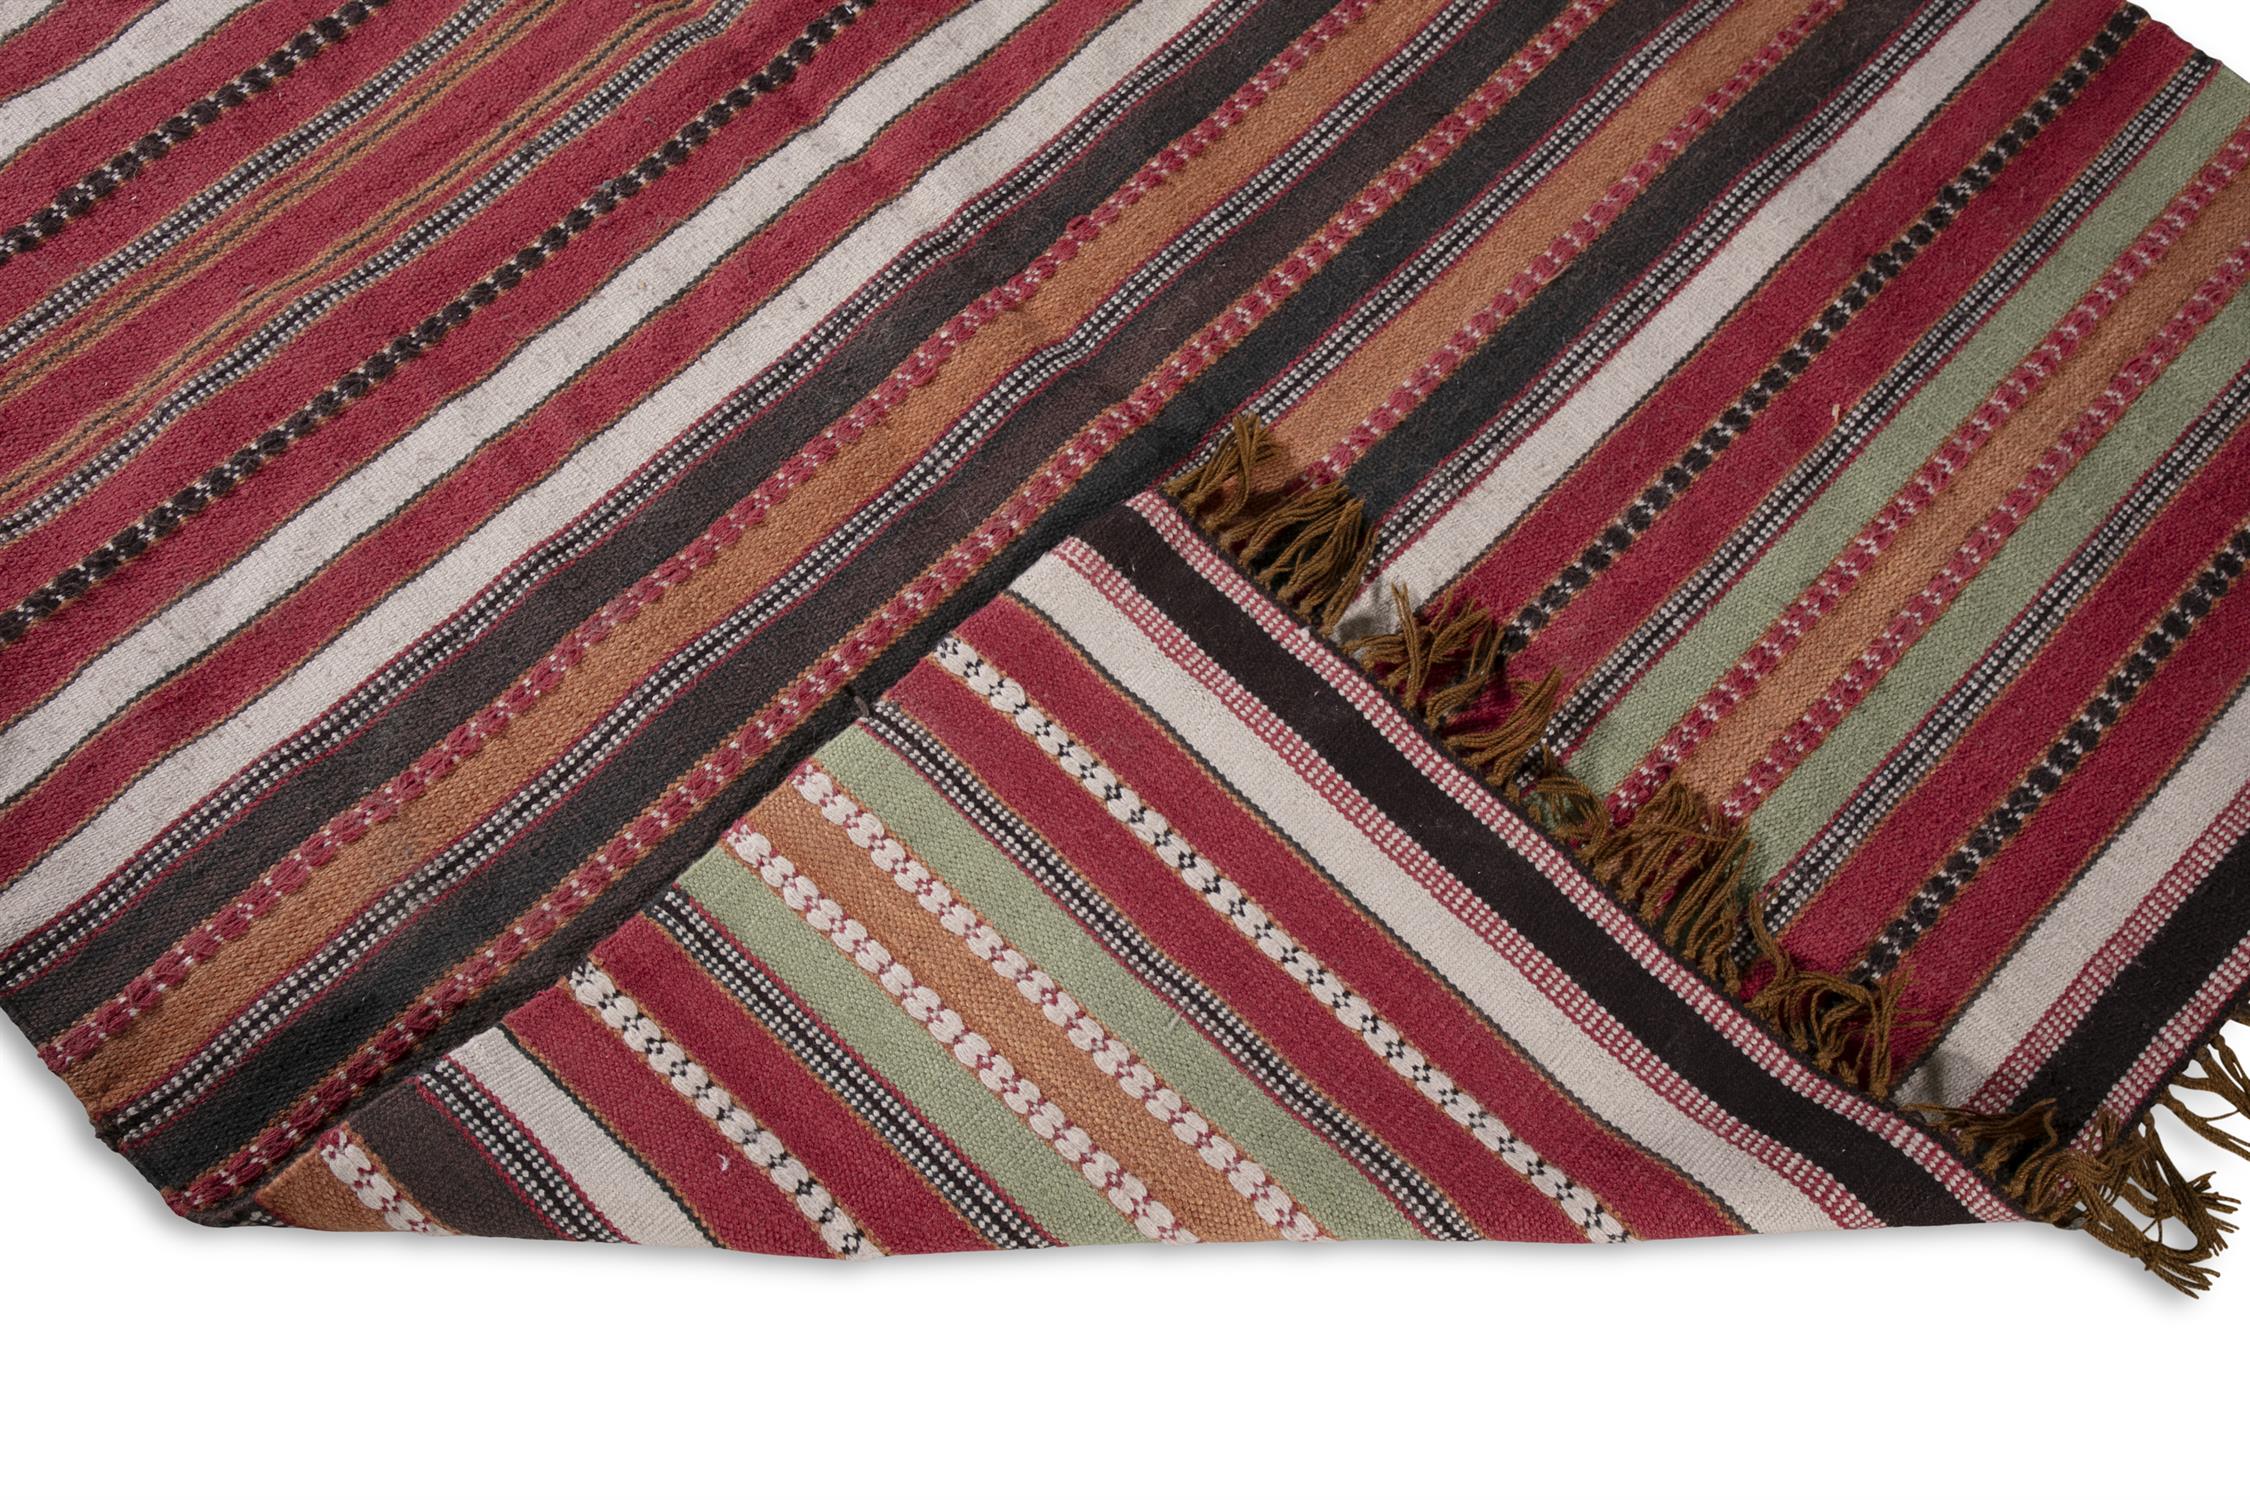 AN OLD KONYA KILIM, S.W. TURKEY, CA 1960, 250 x 150cm woven with horizontal stripes in red, - Image 2 of 4